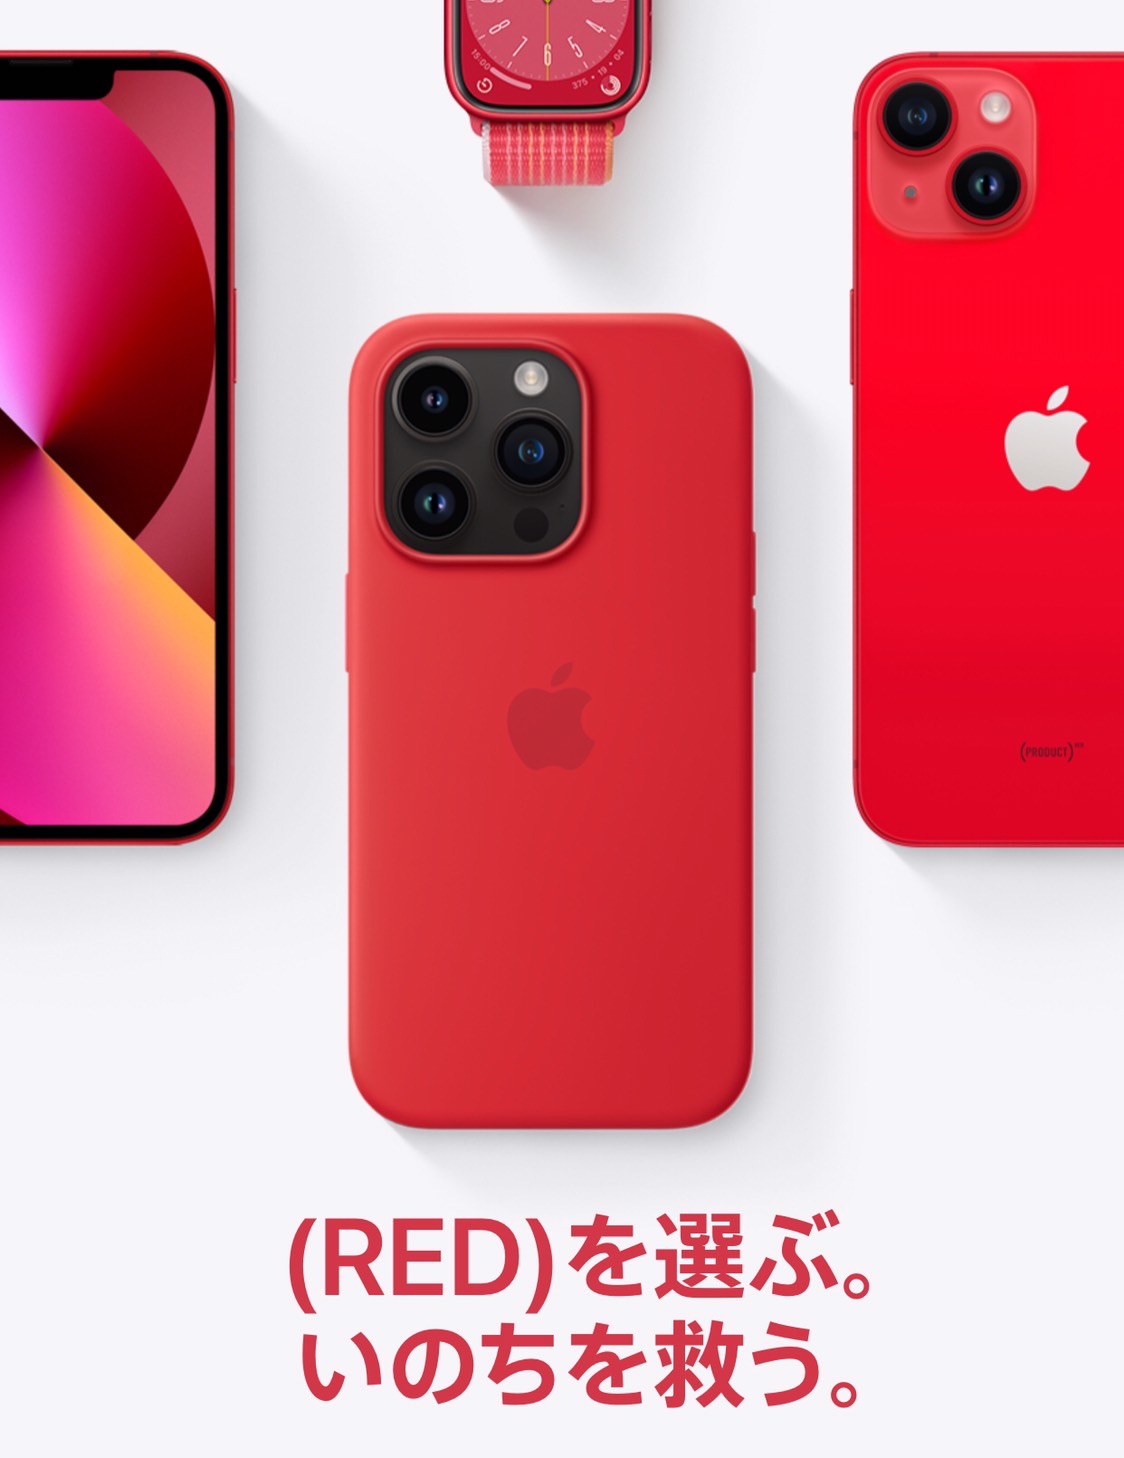 (PRODUCT)REDとは